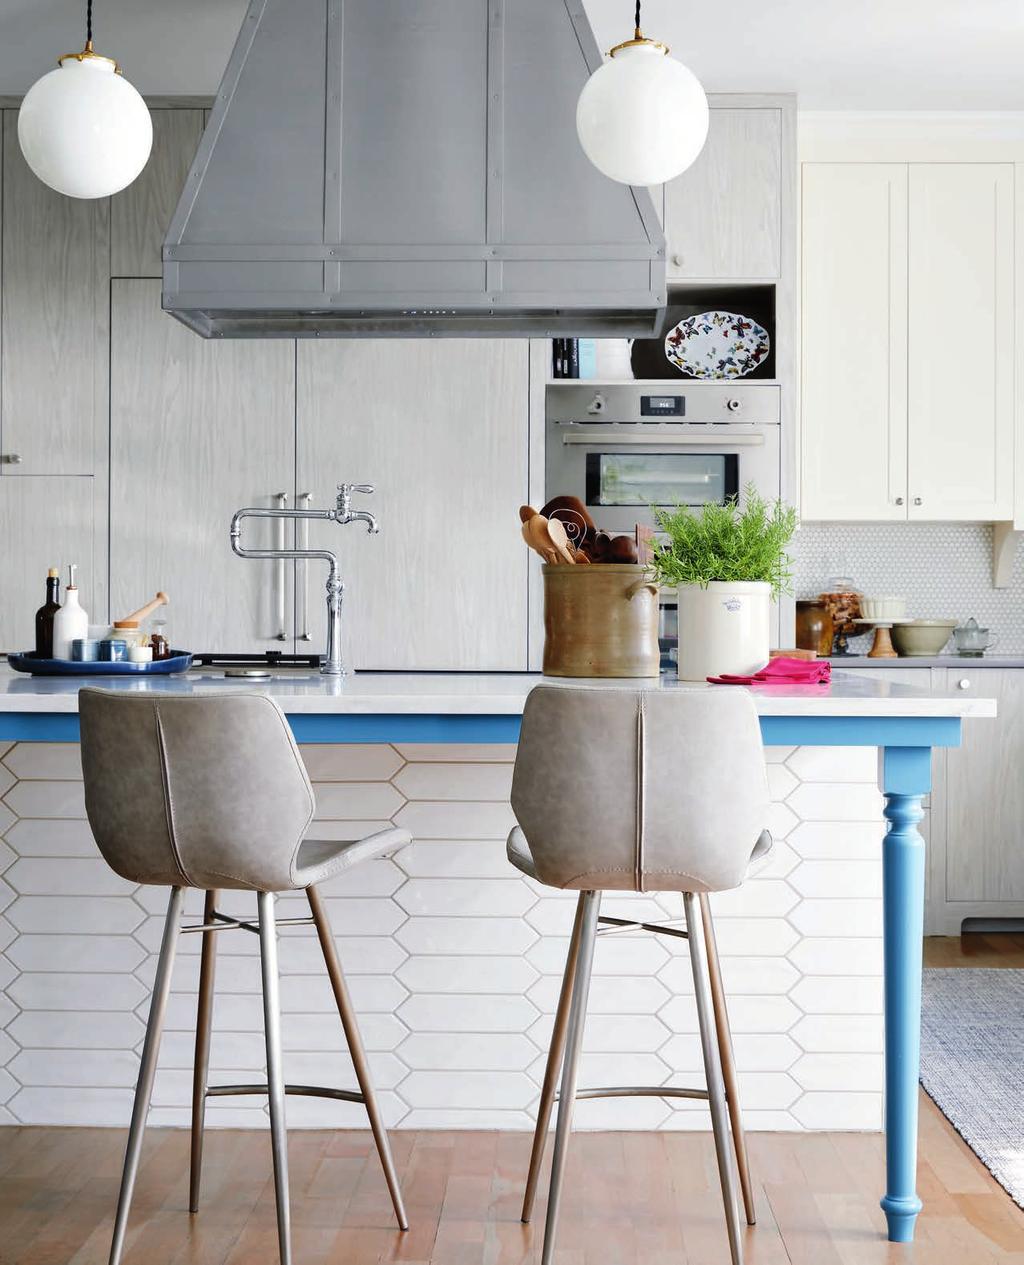 THIS PAGE & OPPOSITE, BOTTOM RIGHT Hexagonal tiles and a turquoisepainted base add interest to the kitchen island.